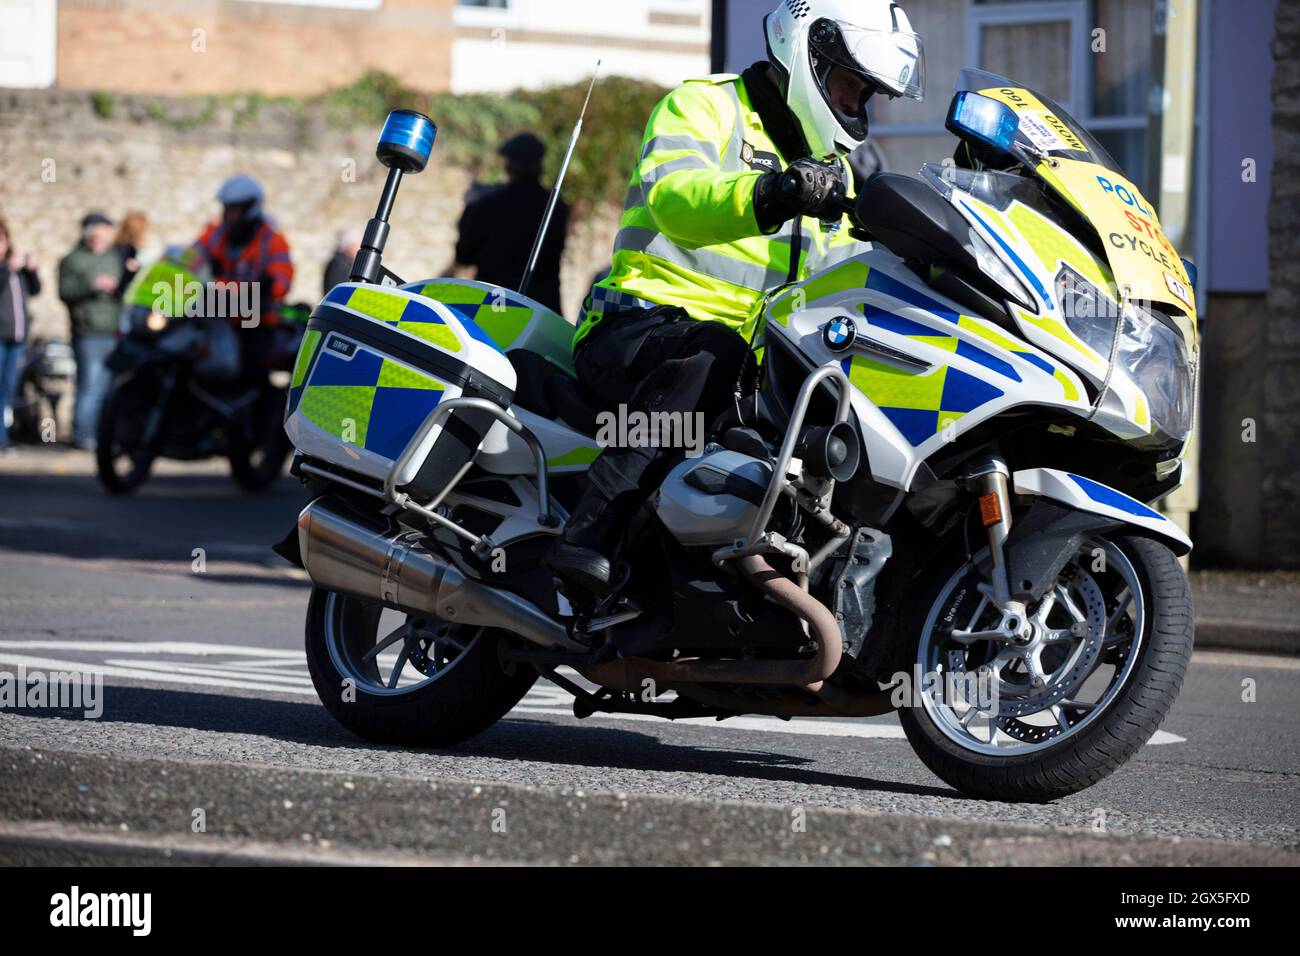 Bicester, UK - October 2021: Police motorbike rider clears traffic during an event Stock Photo